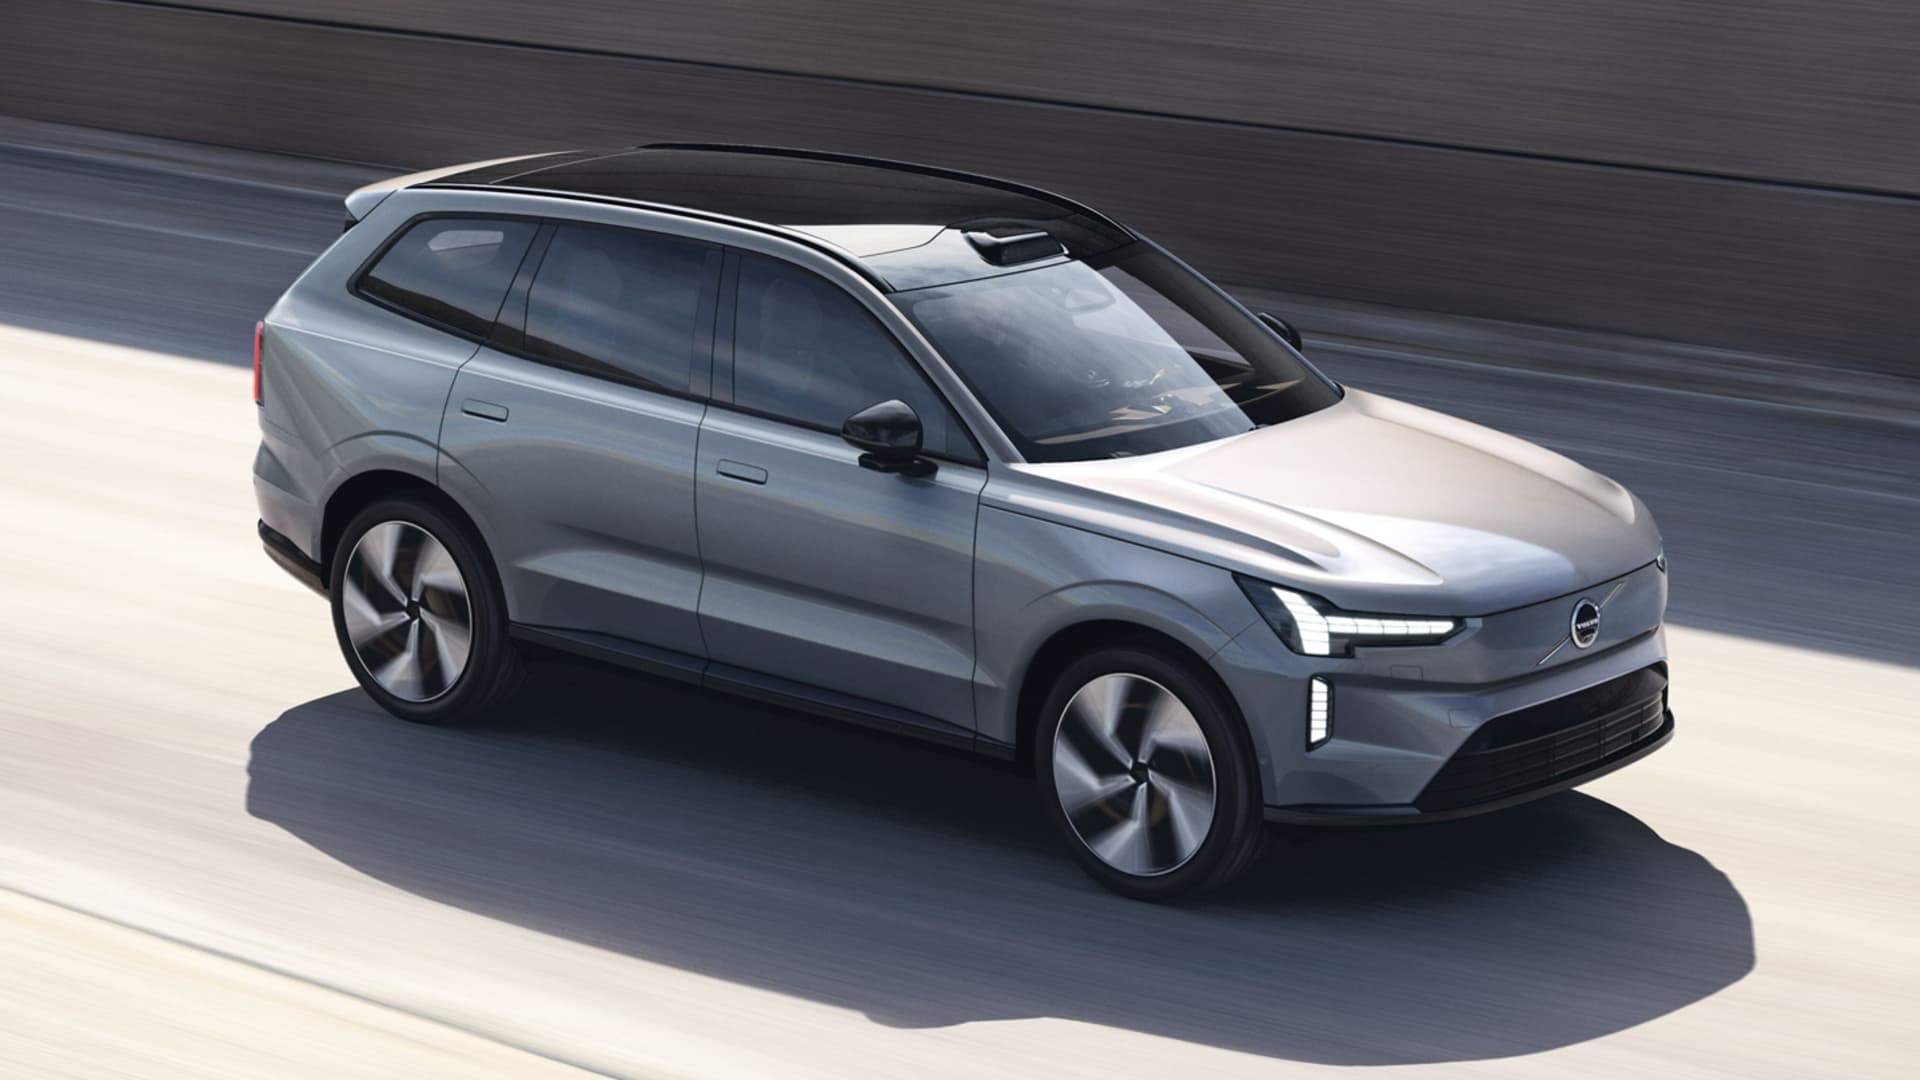 Volvo reveals new $80,000 electric SUV with Luminar lidar